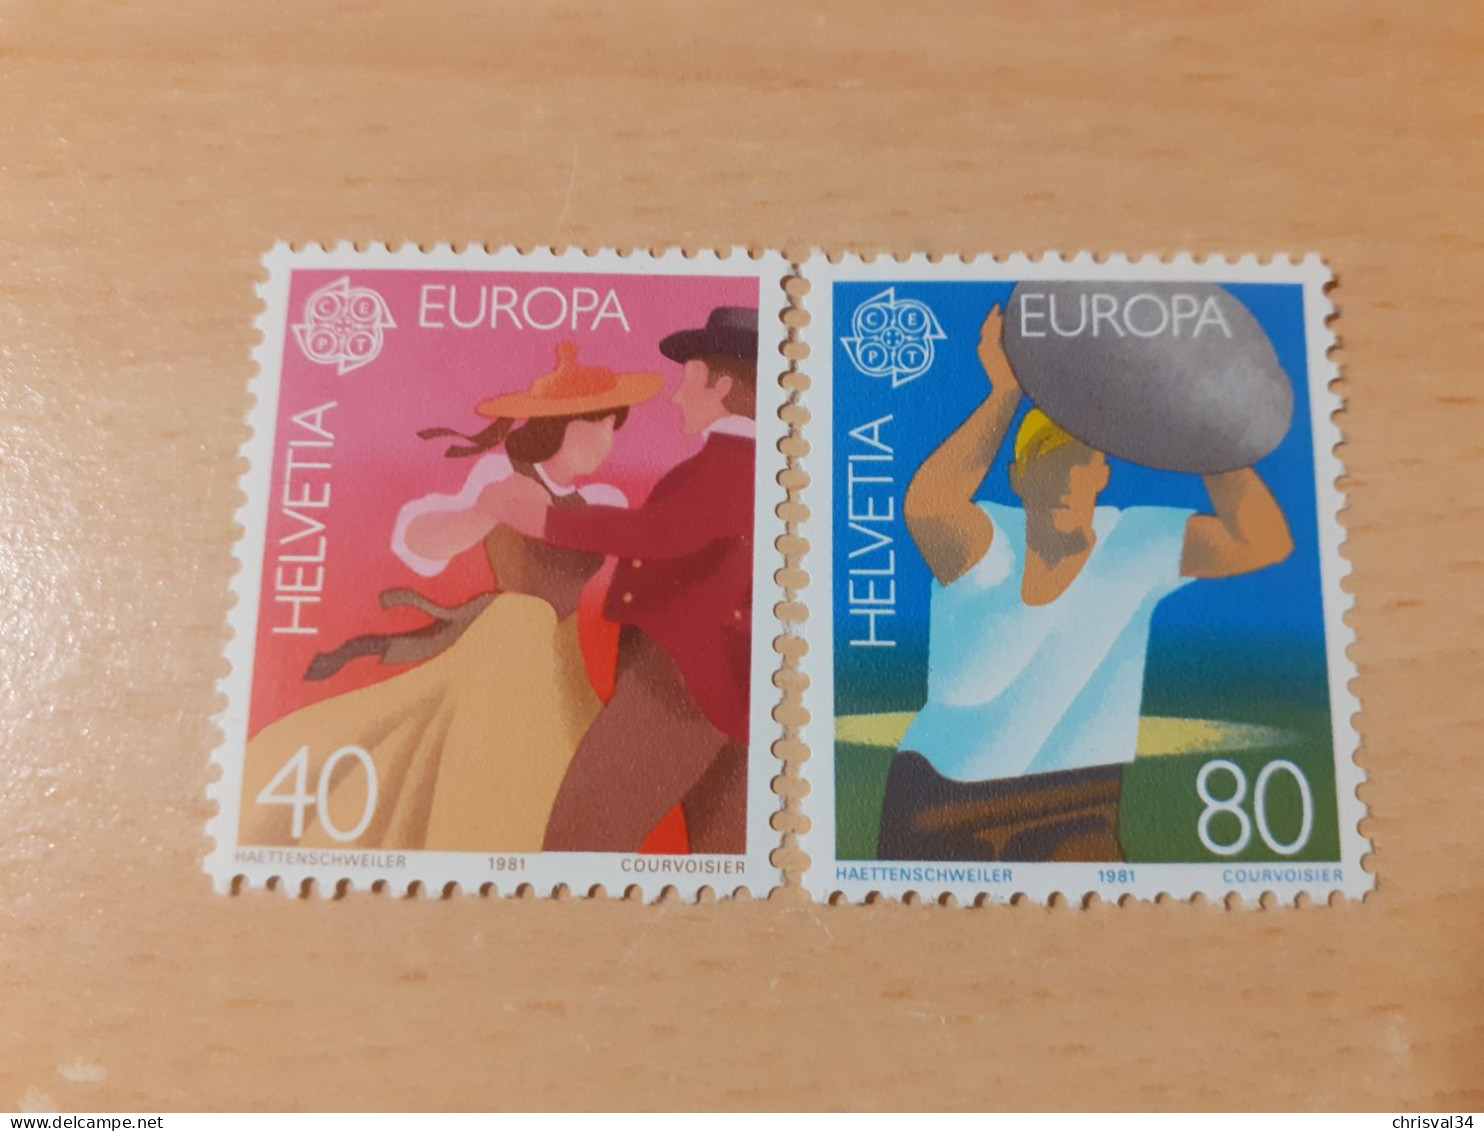 TIMBRES   EUROPA   1981  SUISSE   N  1126  / 1127   COTE  2,50  EUROS    NEUFS  LUXE** - 1981